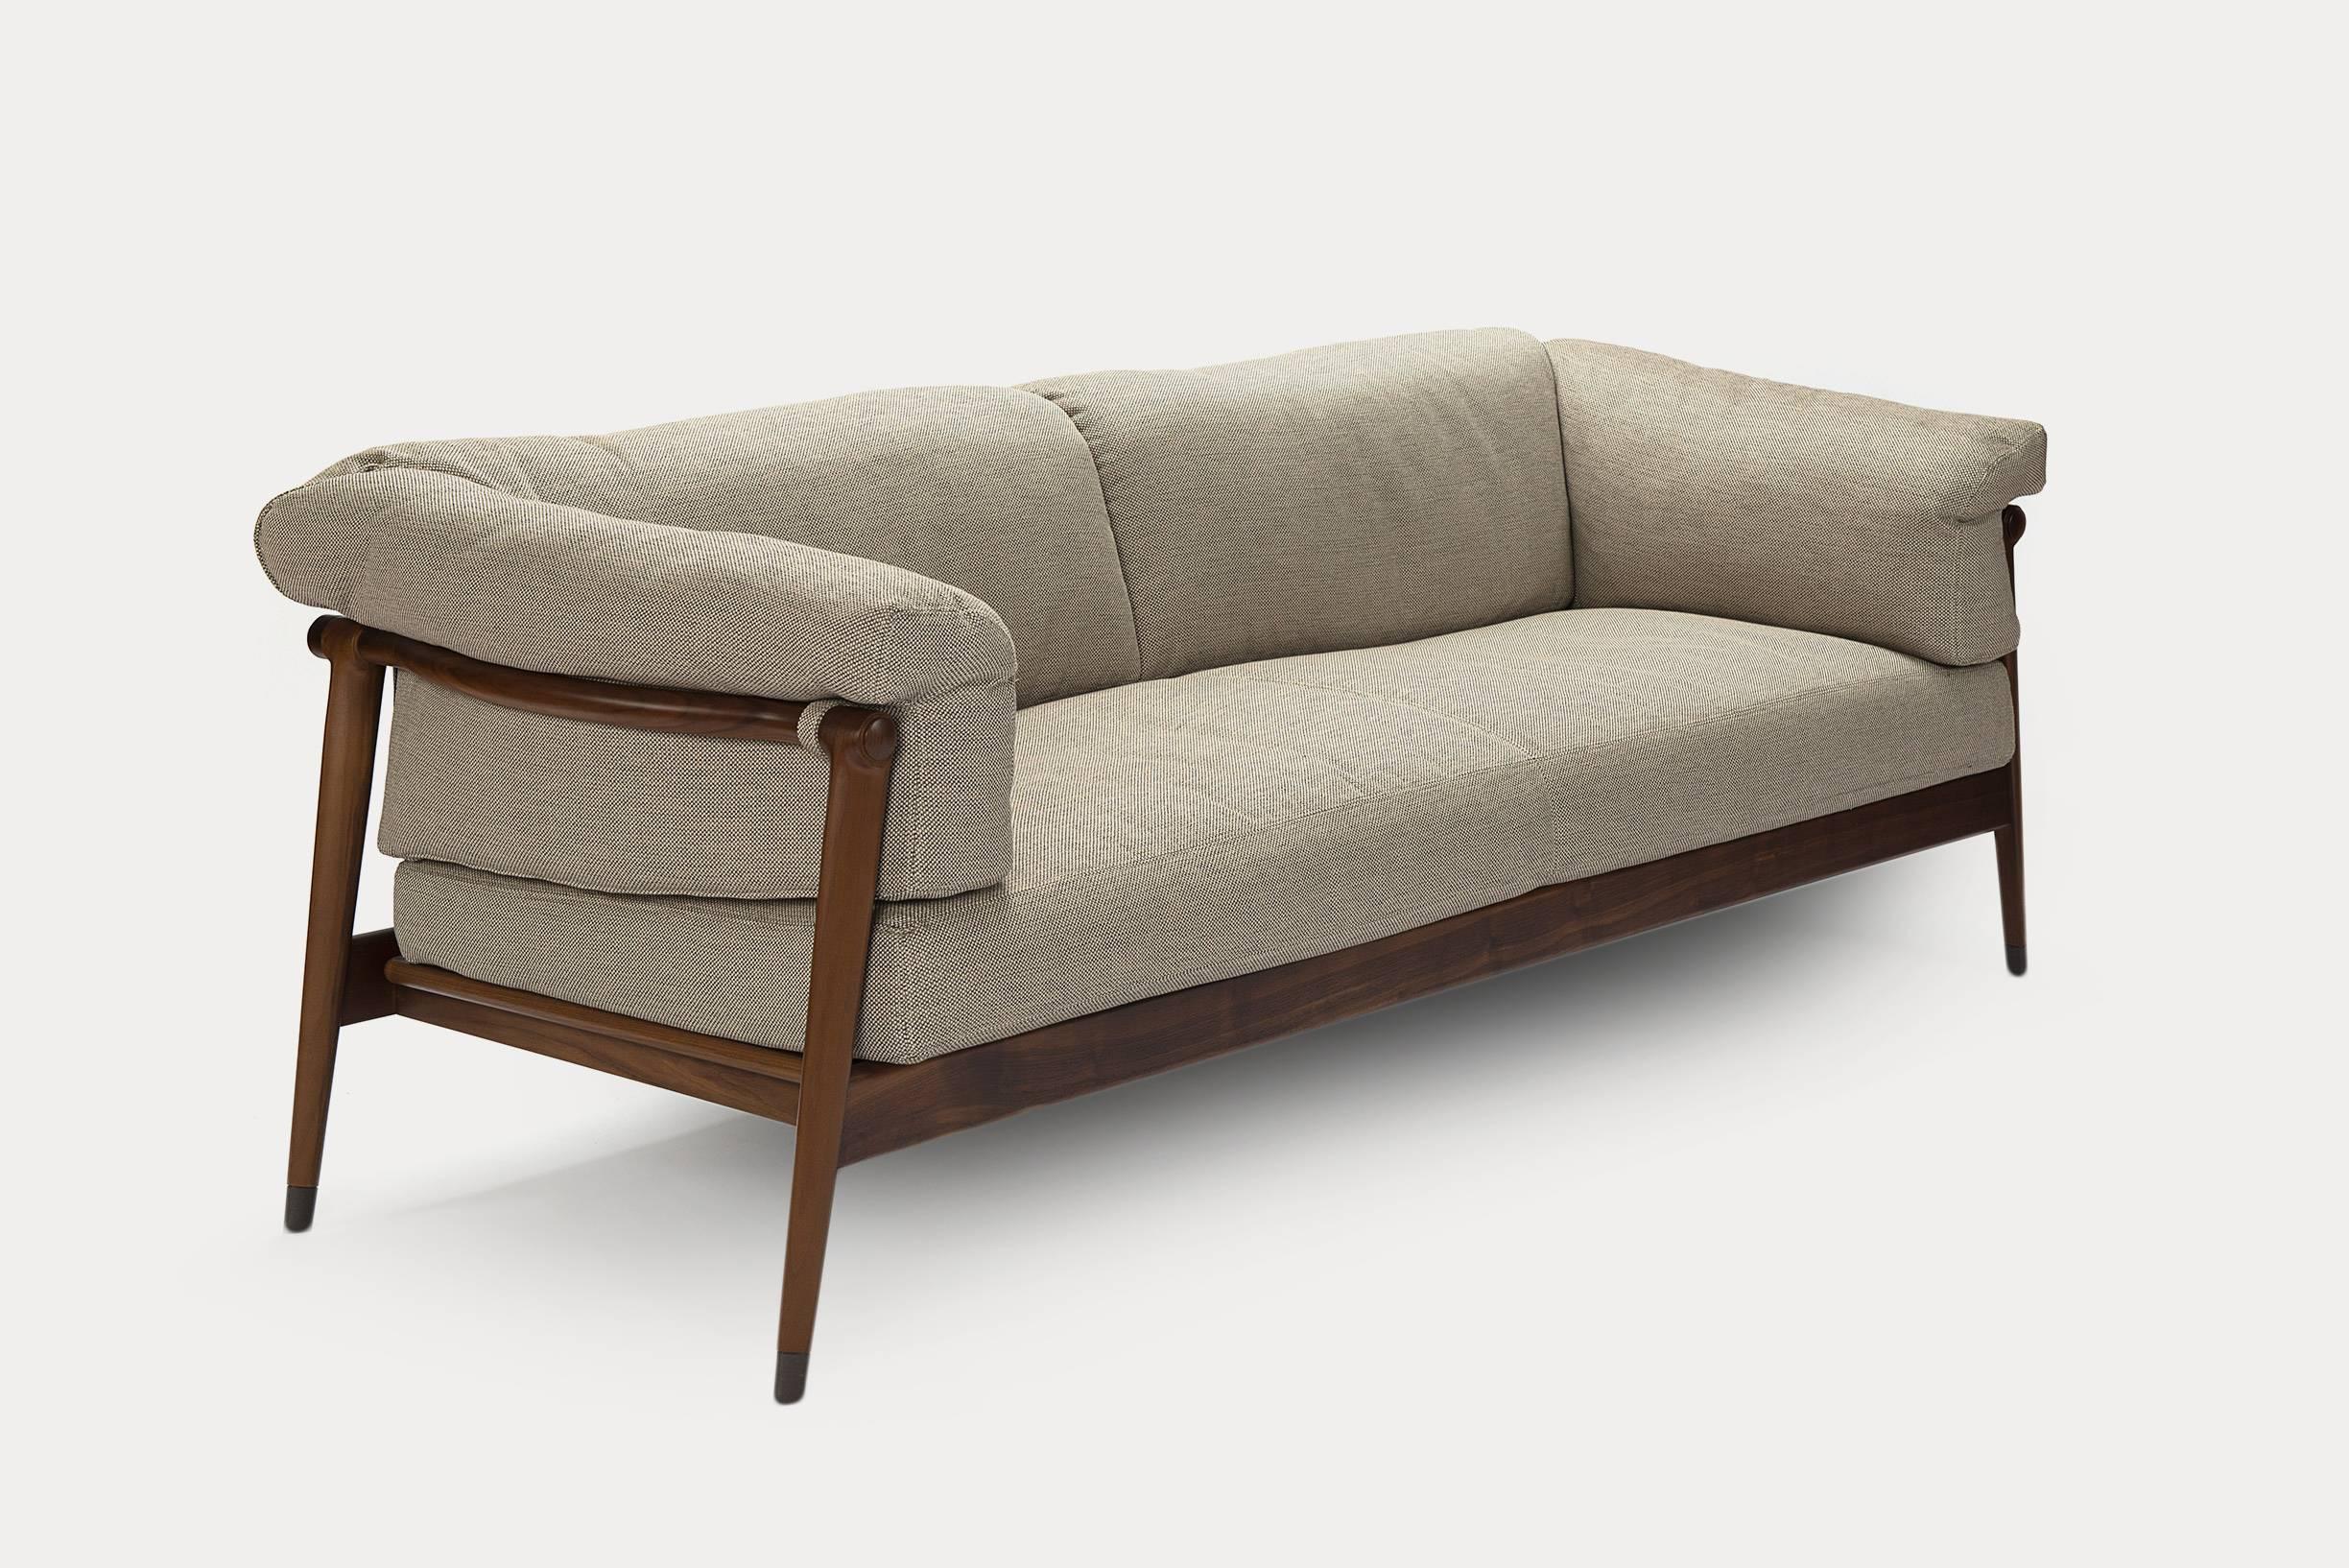 Derby sofa is a comfortable Nordic inspired jewel of a sofa which warms a room with reflections of wood, adapting itself to different solutions. Shown in Loft Cappucino fabric and Canaletto Walnut Frame.  